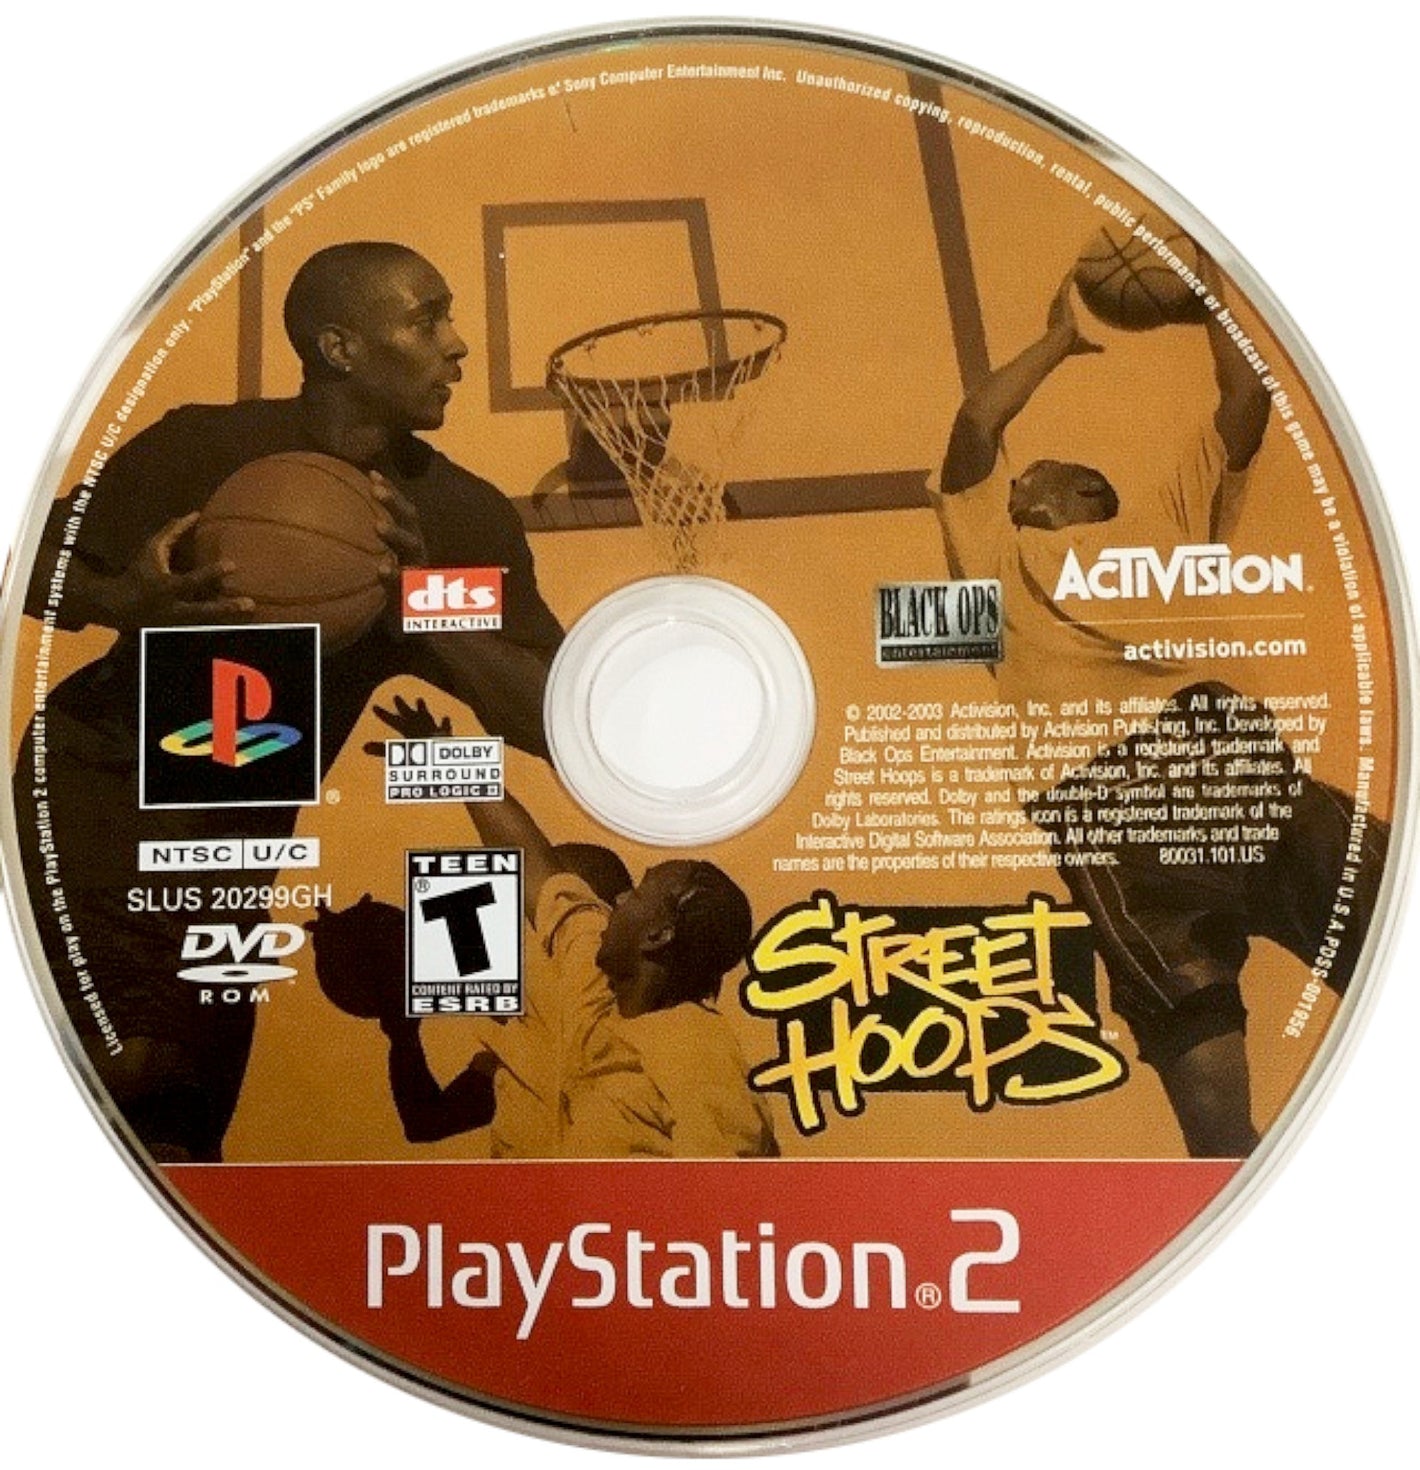 Street Hoops Sony PlayStation 2 PS2 Greatest Hit Video Game DISC ONLY basketball [Used/Refurbished]